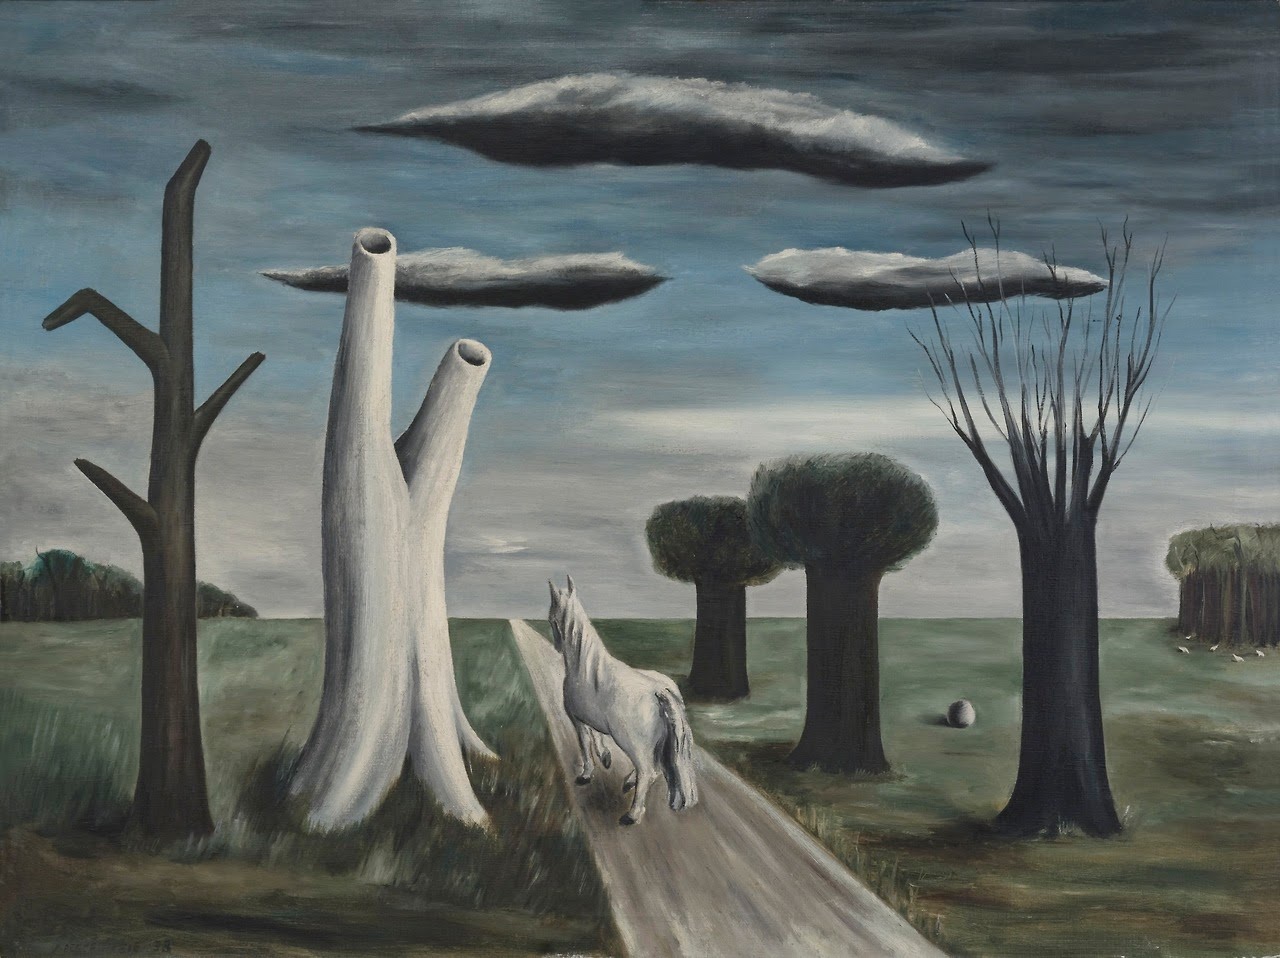 Surreal landscape painting by Gertrude Abercrombie, featuring ghostly white figures resembling trees against a brooding sky, a solitary white horse on a path, and distinct, topiary-like trees, encapsulating Abercrombie's signature style ideal for collectors seeking to buy original art from influential surrealists, enhancing their art gallery or private collection.